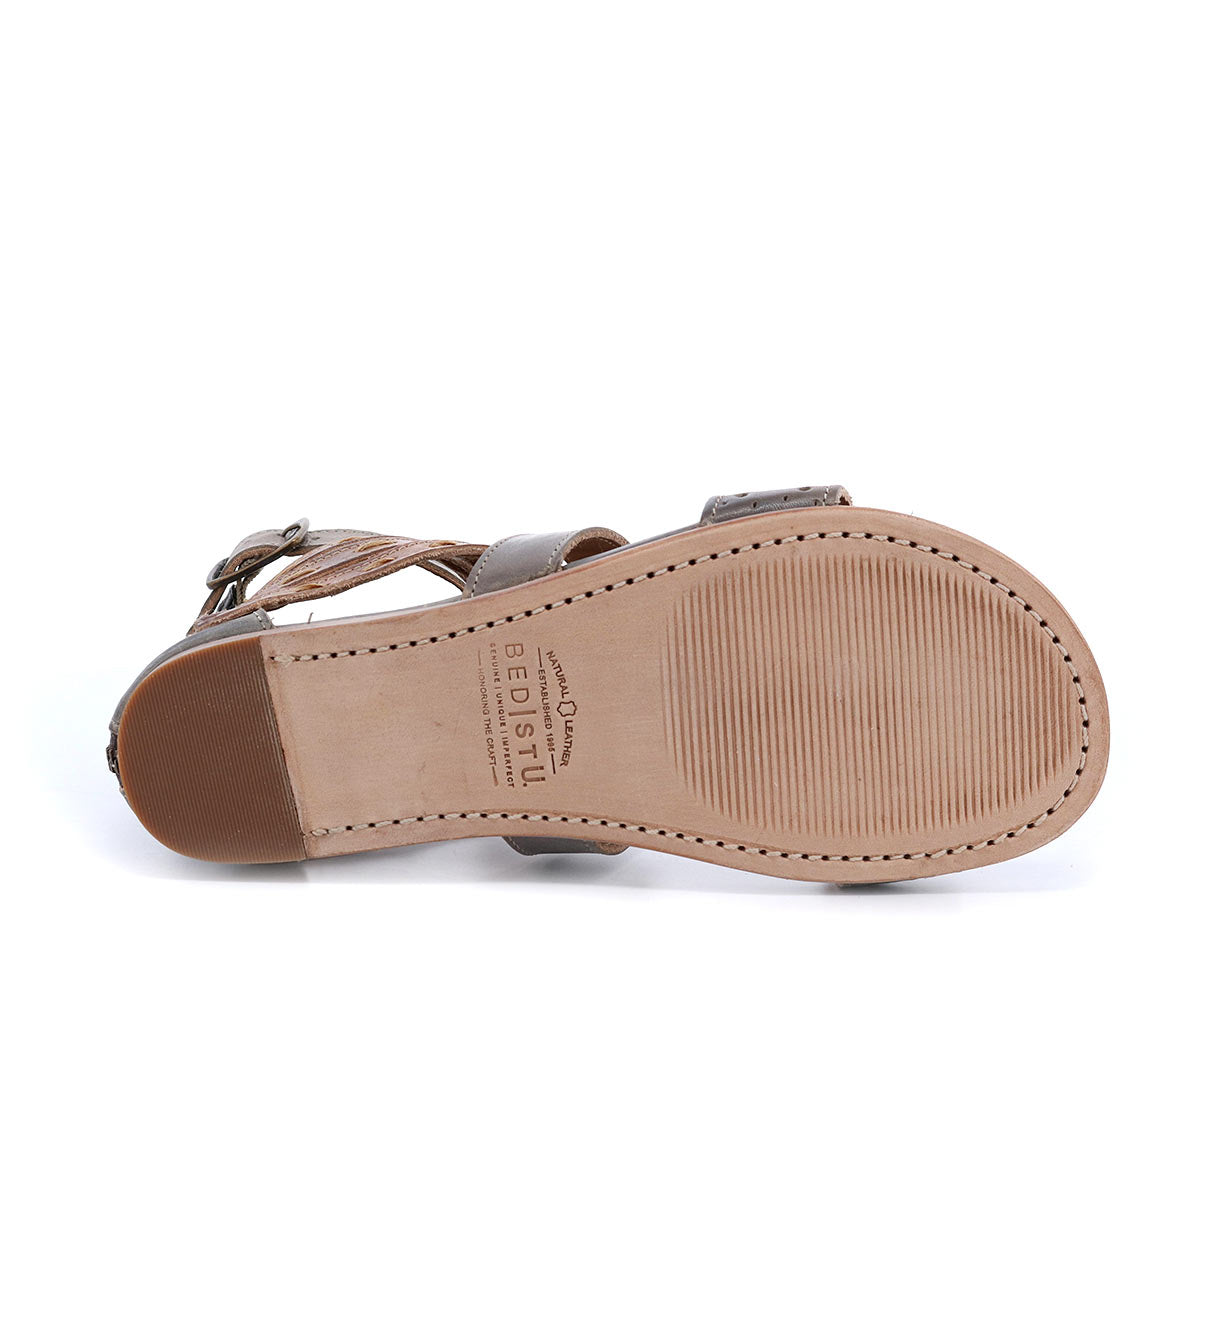 A pair of Bed Stu Artemis women's brown sandals on a white background.